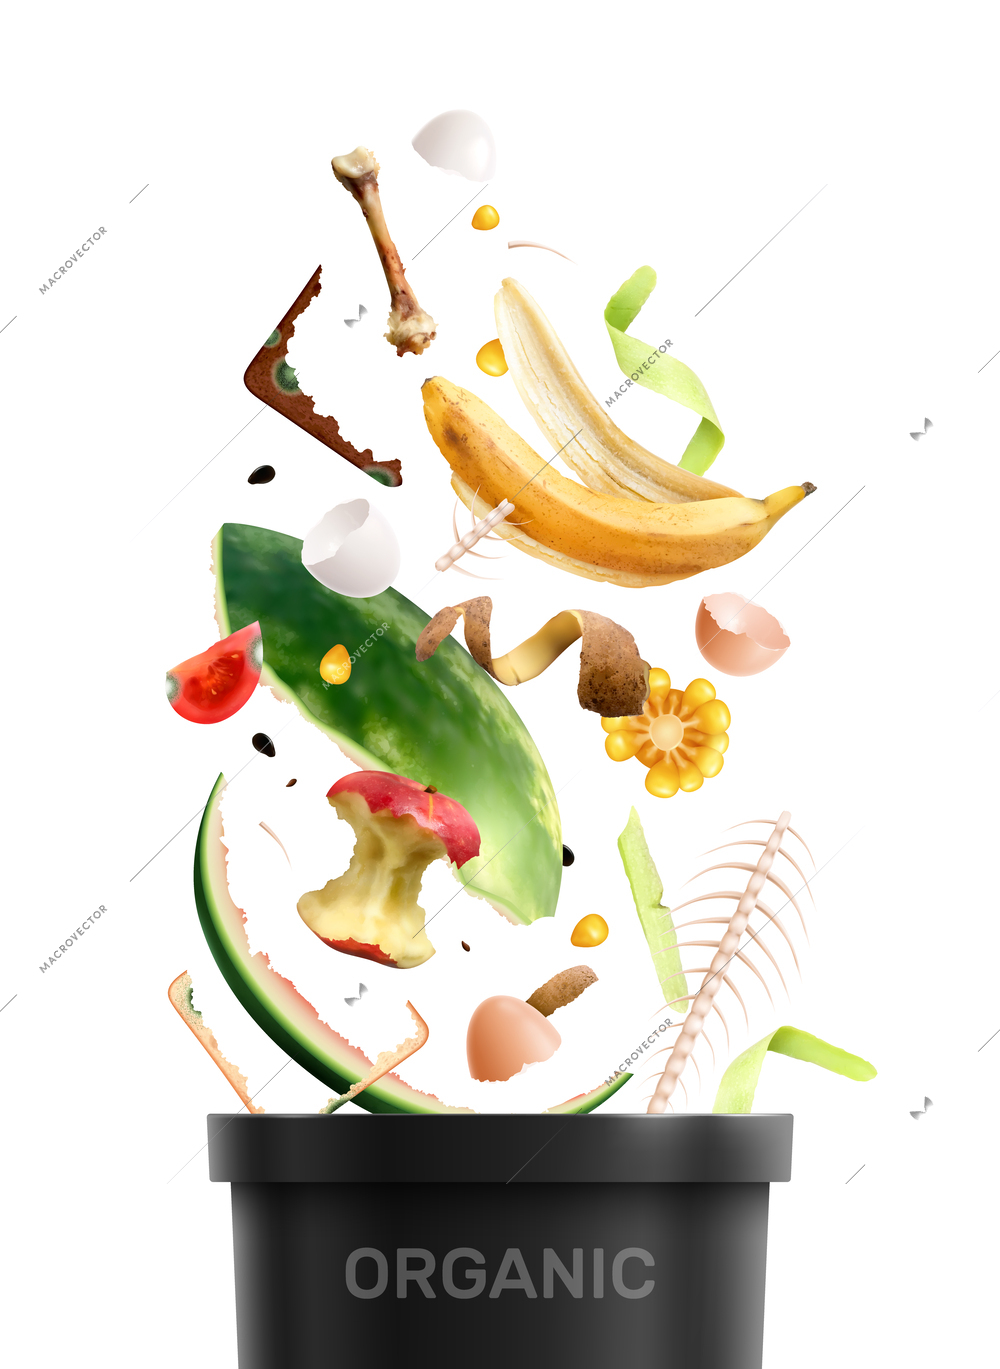 Food waste realistic composition with scraps of food leavings falling into plastic trash bin with text vector illustration